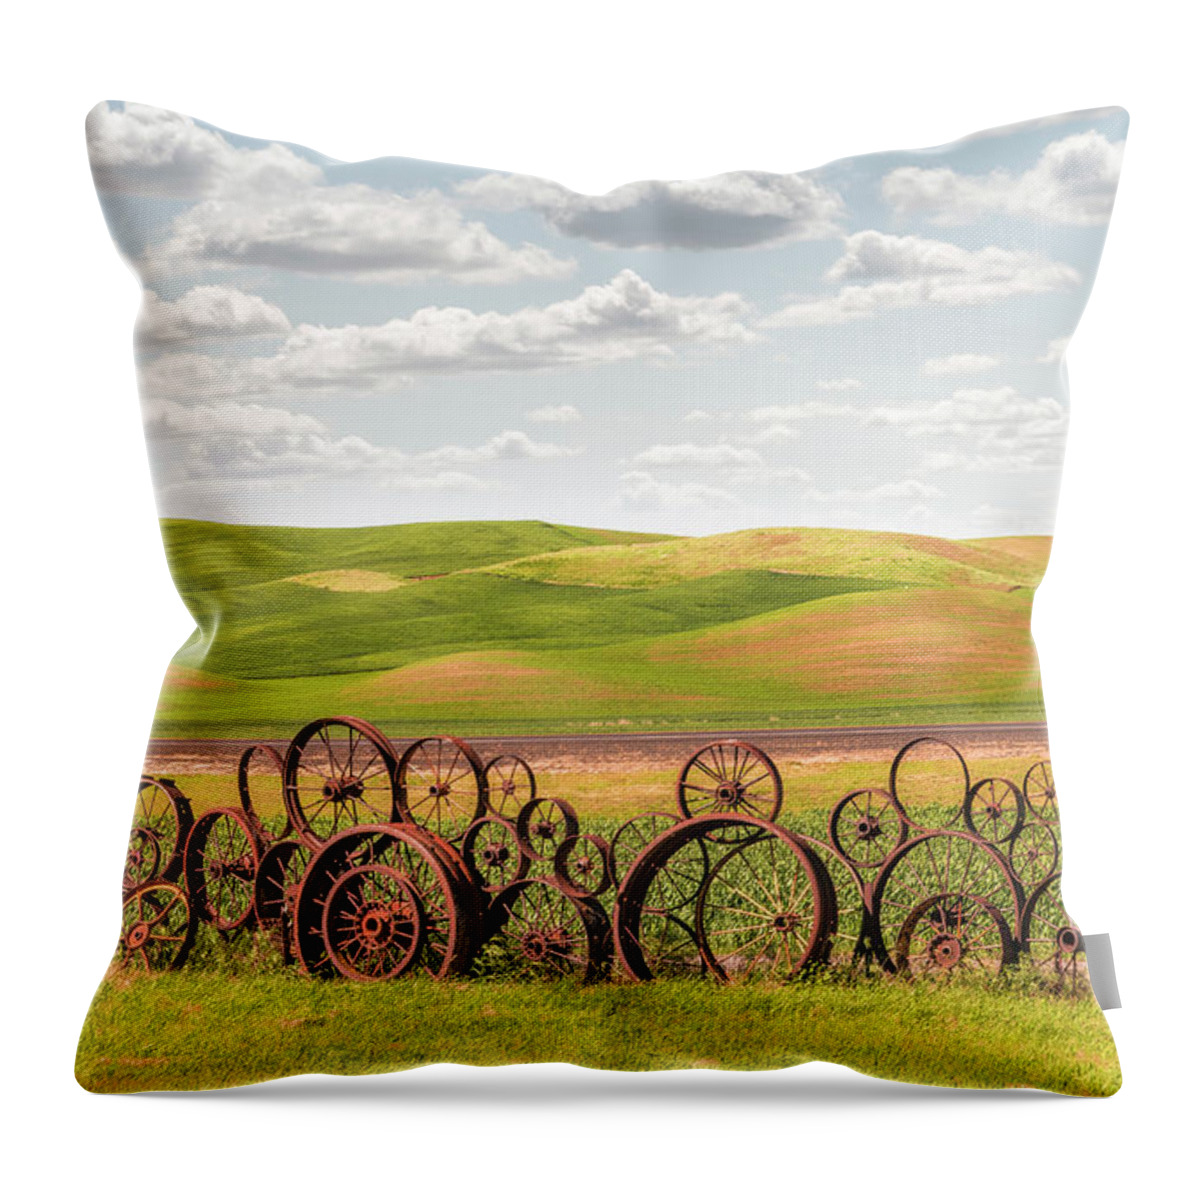 Agriculture Throw Pillow featuring the photograph Wagon wheels art work by Usha Peddamatham